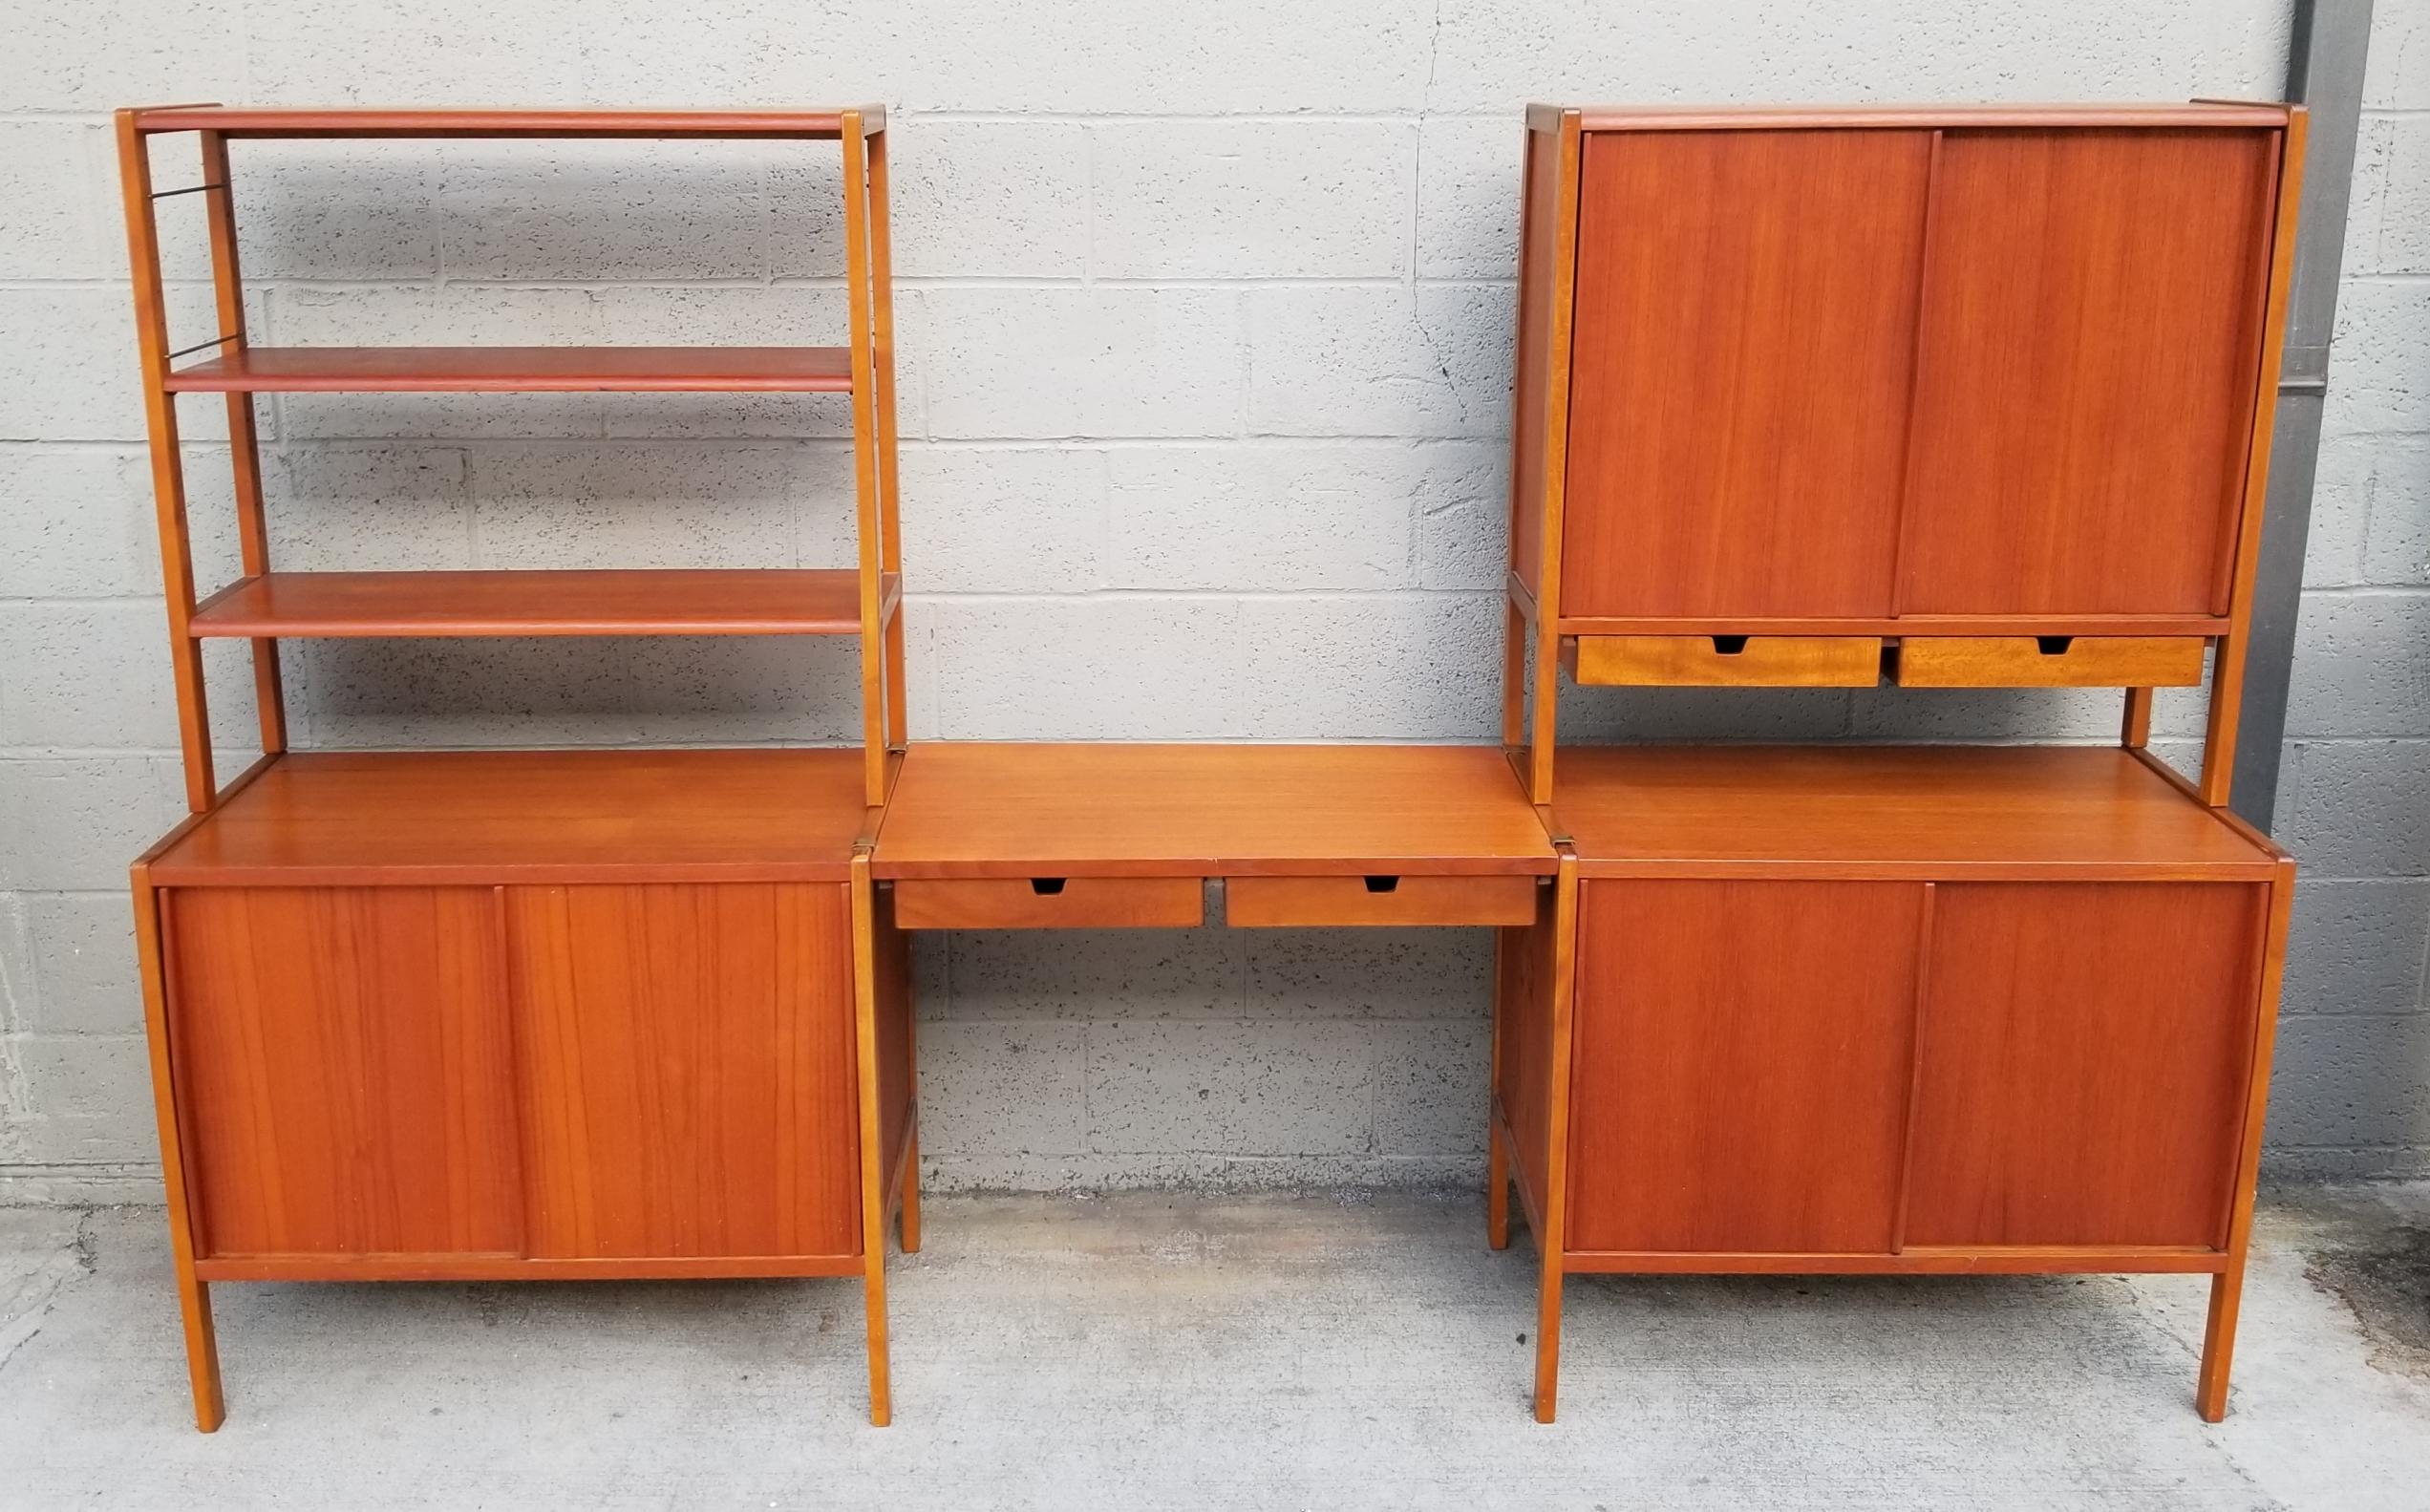 Exceptional Scandinavian Modern teak module wall unit by DUX Furniture, Sweden, circa 1950s-1960s. Beautiful glow to original finish. Consists of 5 units that can be easily moved and rearranged for specific needs. Two base cabinets, 2 uppers shelf